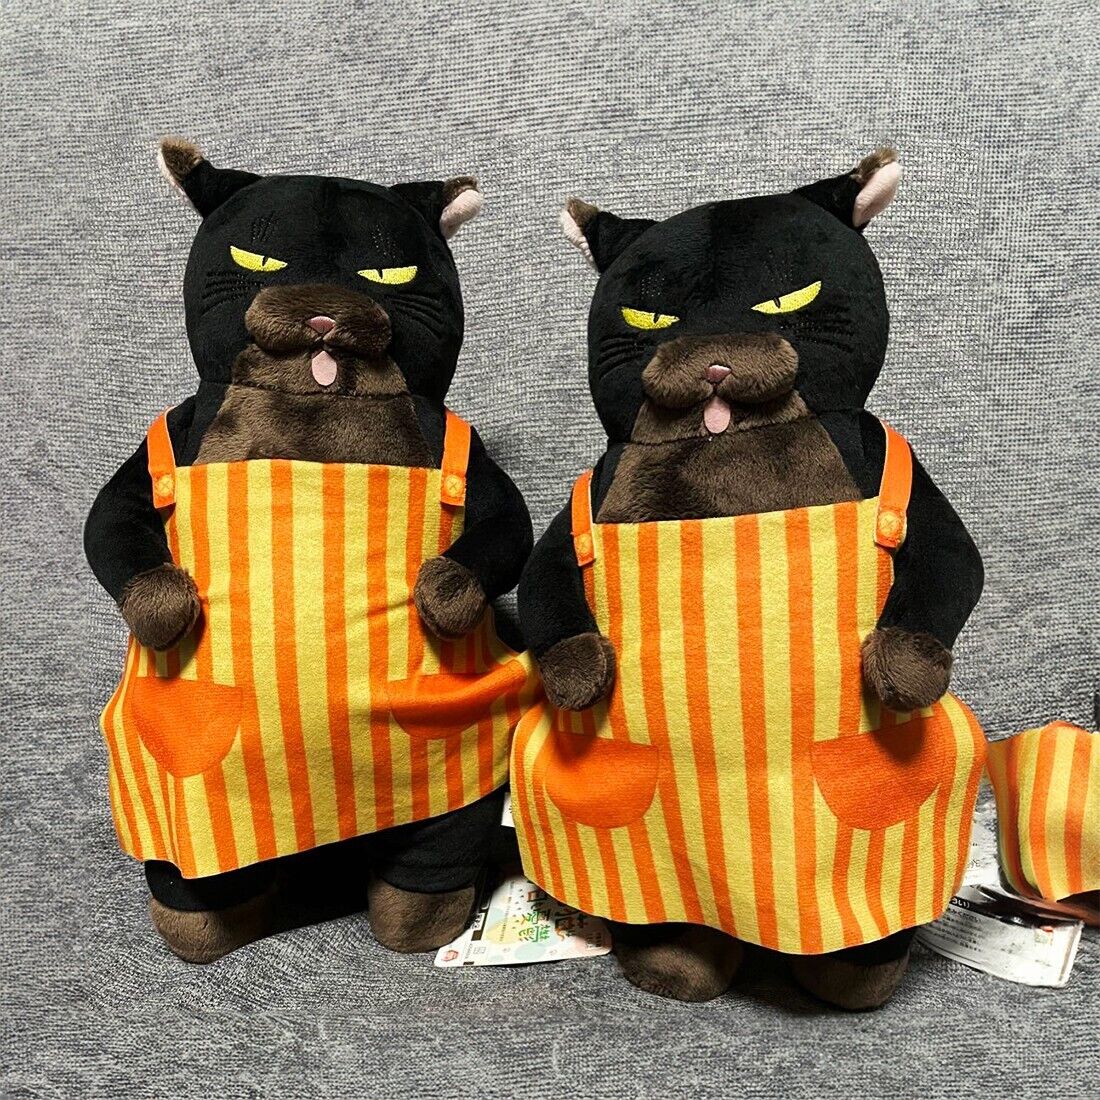 The Masterful Cat Is Depressed Again Today Big Plush Toy 12in Set of 2 Japan